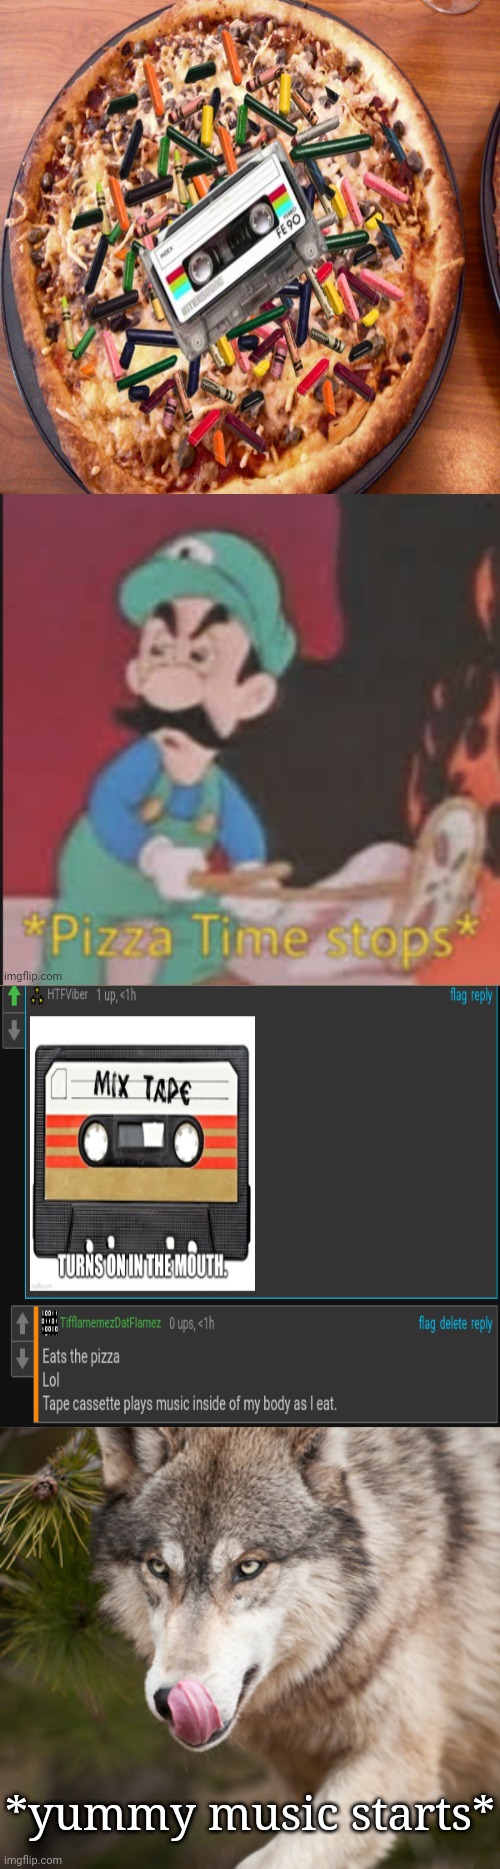 Yummy: Eating the crayon, tape cassette, and cheese pizza | *yummy music starts* | image tagged in yummy,comment section,cursed,memes,comment,comments | made w/ Imgflip meme maker